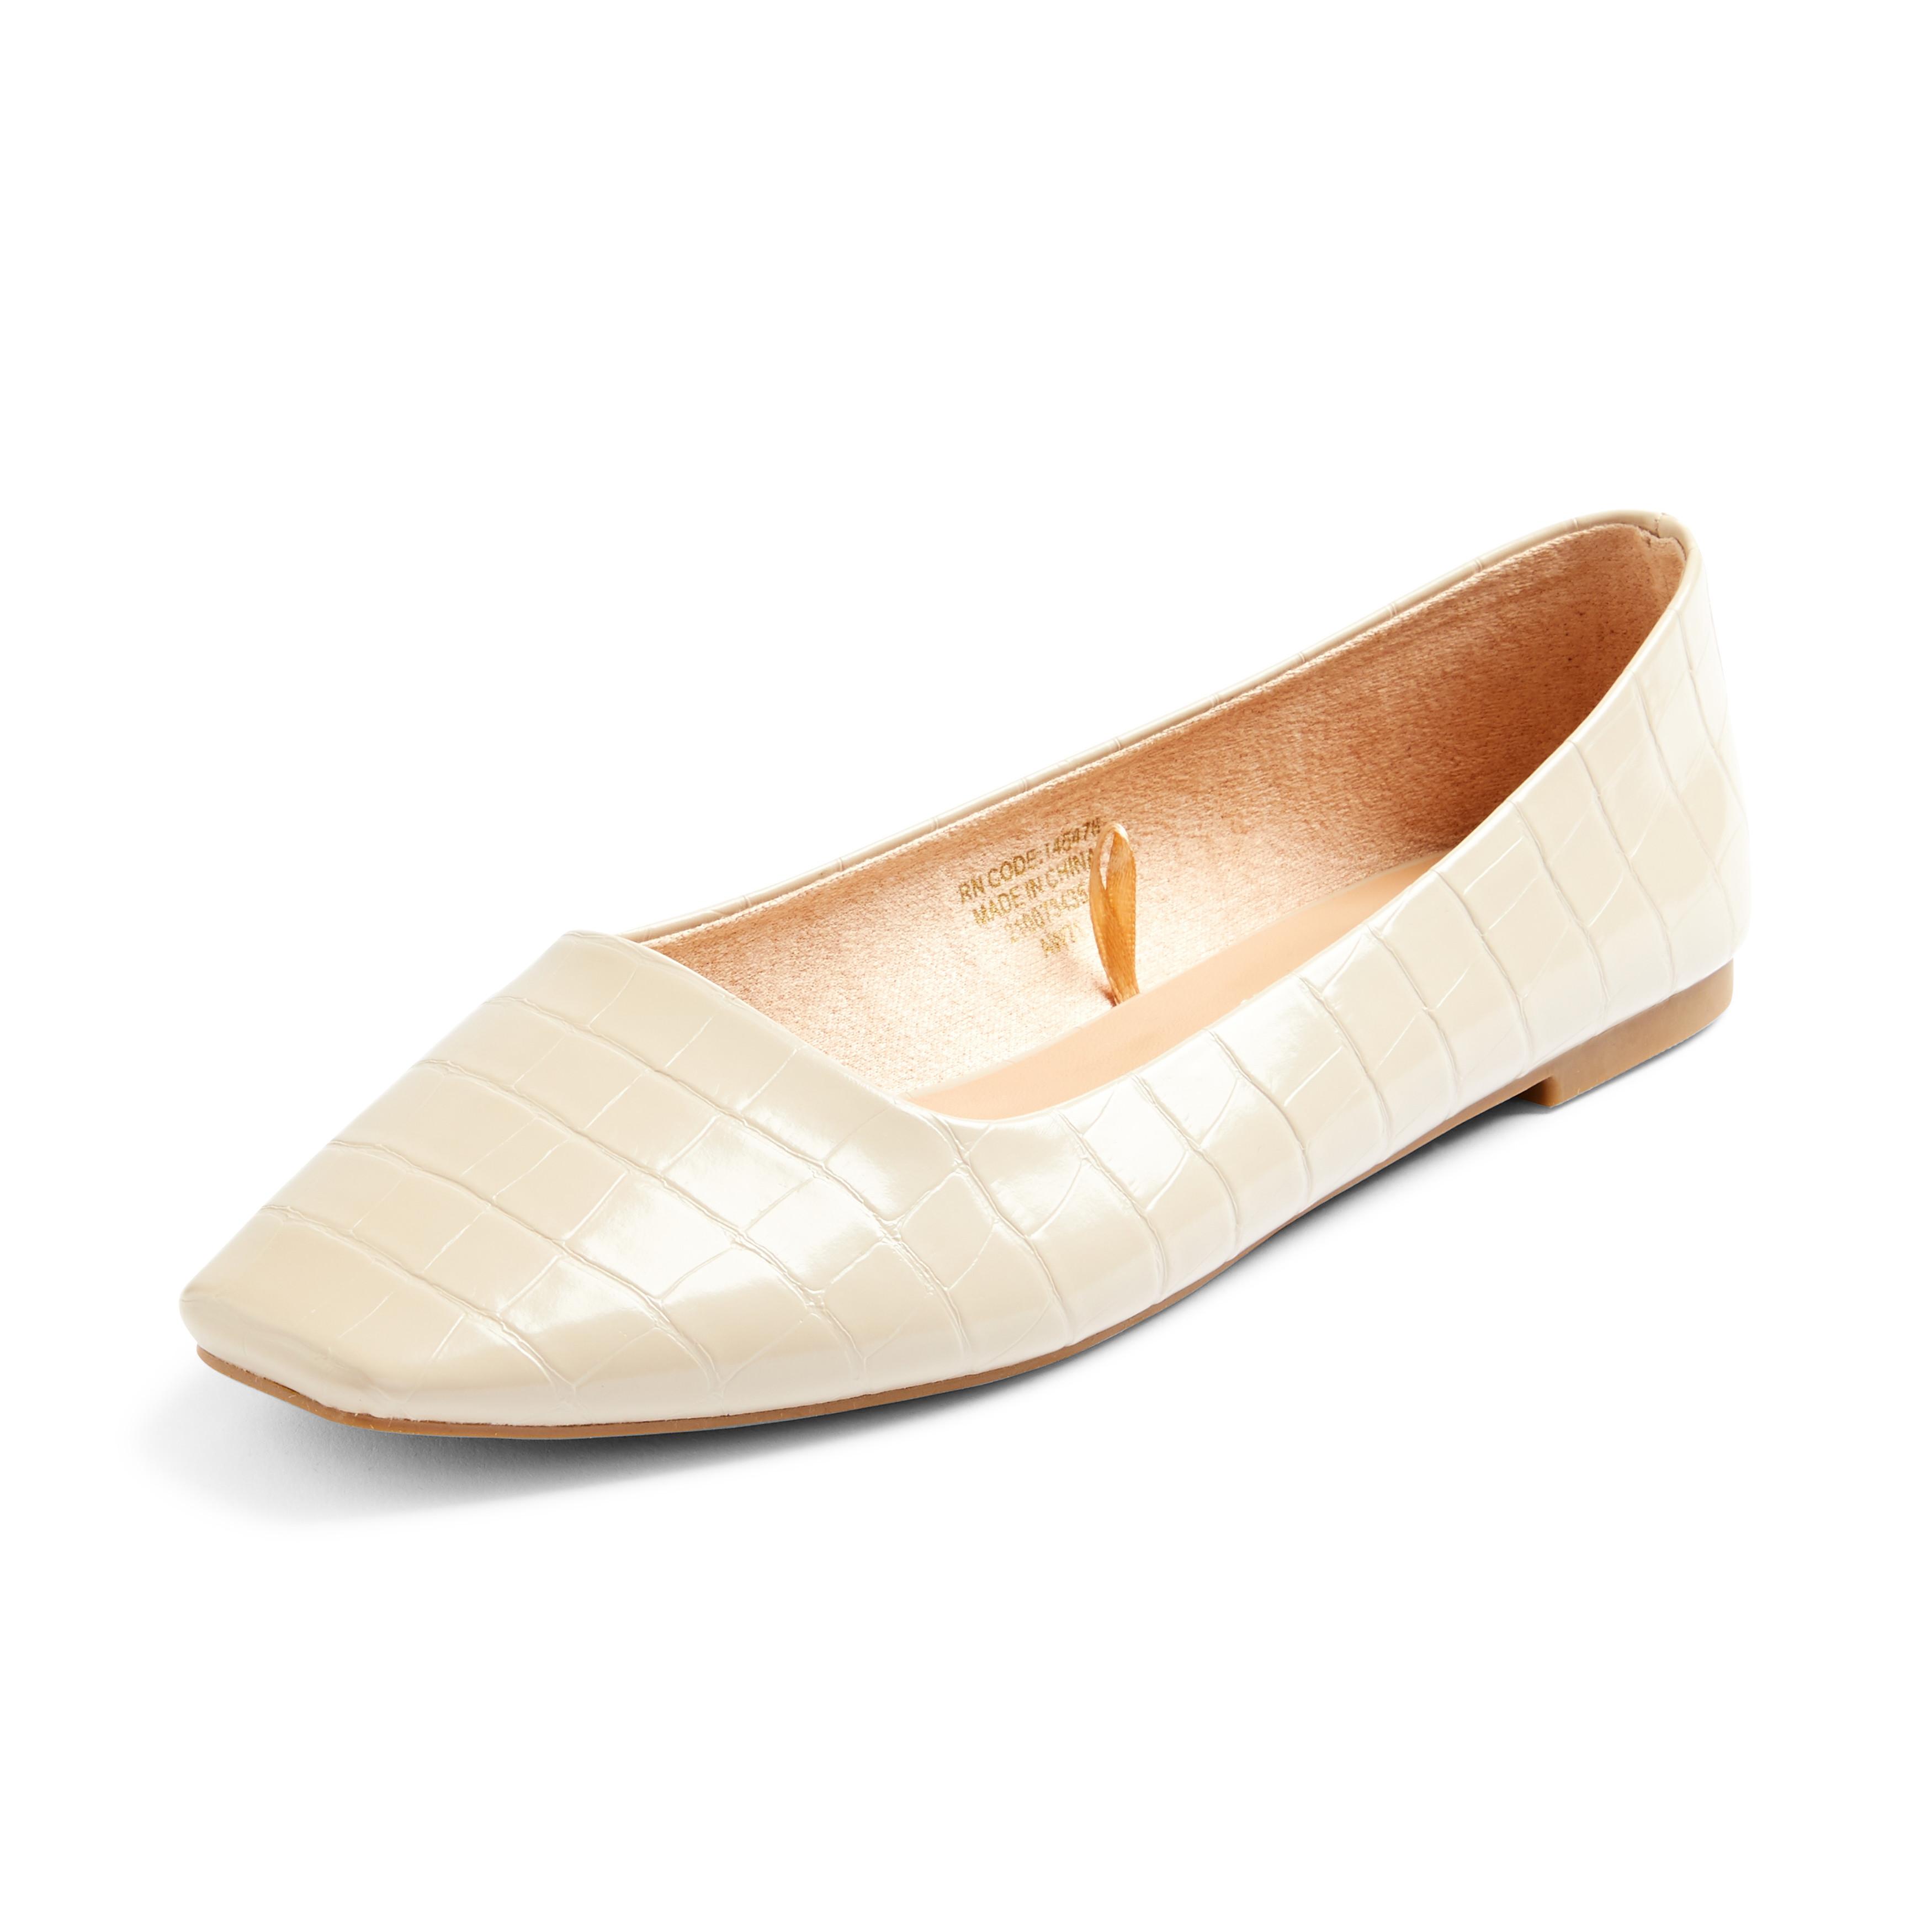 Grundig hvor ofte Bourgogne Ivory Square Toe Ballerina Shoes | Ballet Shoes, Loafers & Pumps | Women's  Shoes & Boots | Our Women's Fashion Range | All Primark Products | Penneys